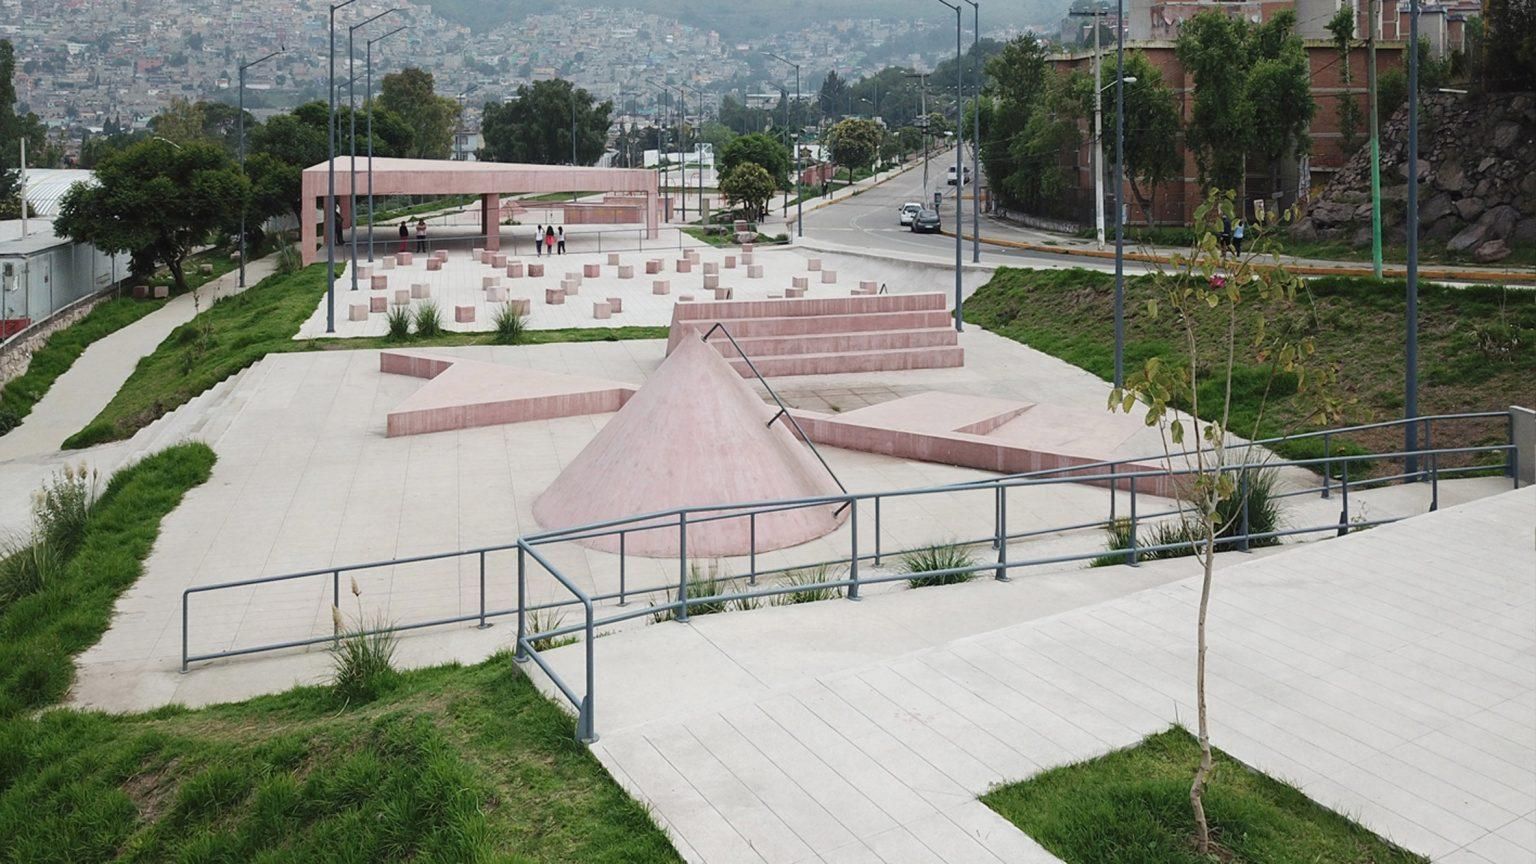 Productora designs pink concrete playgrounds in Mexico